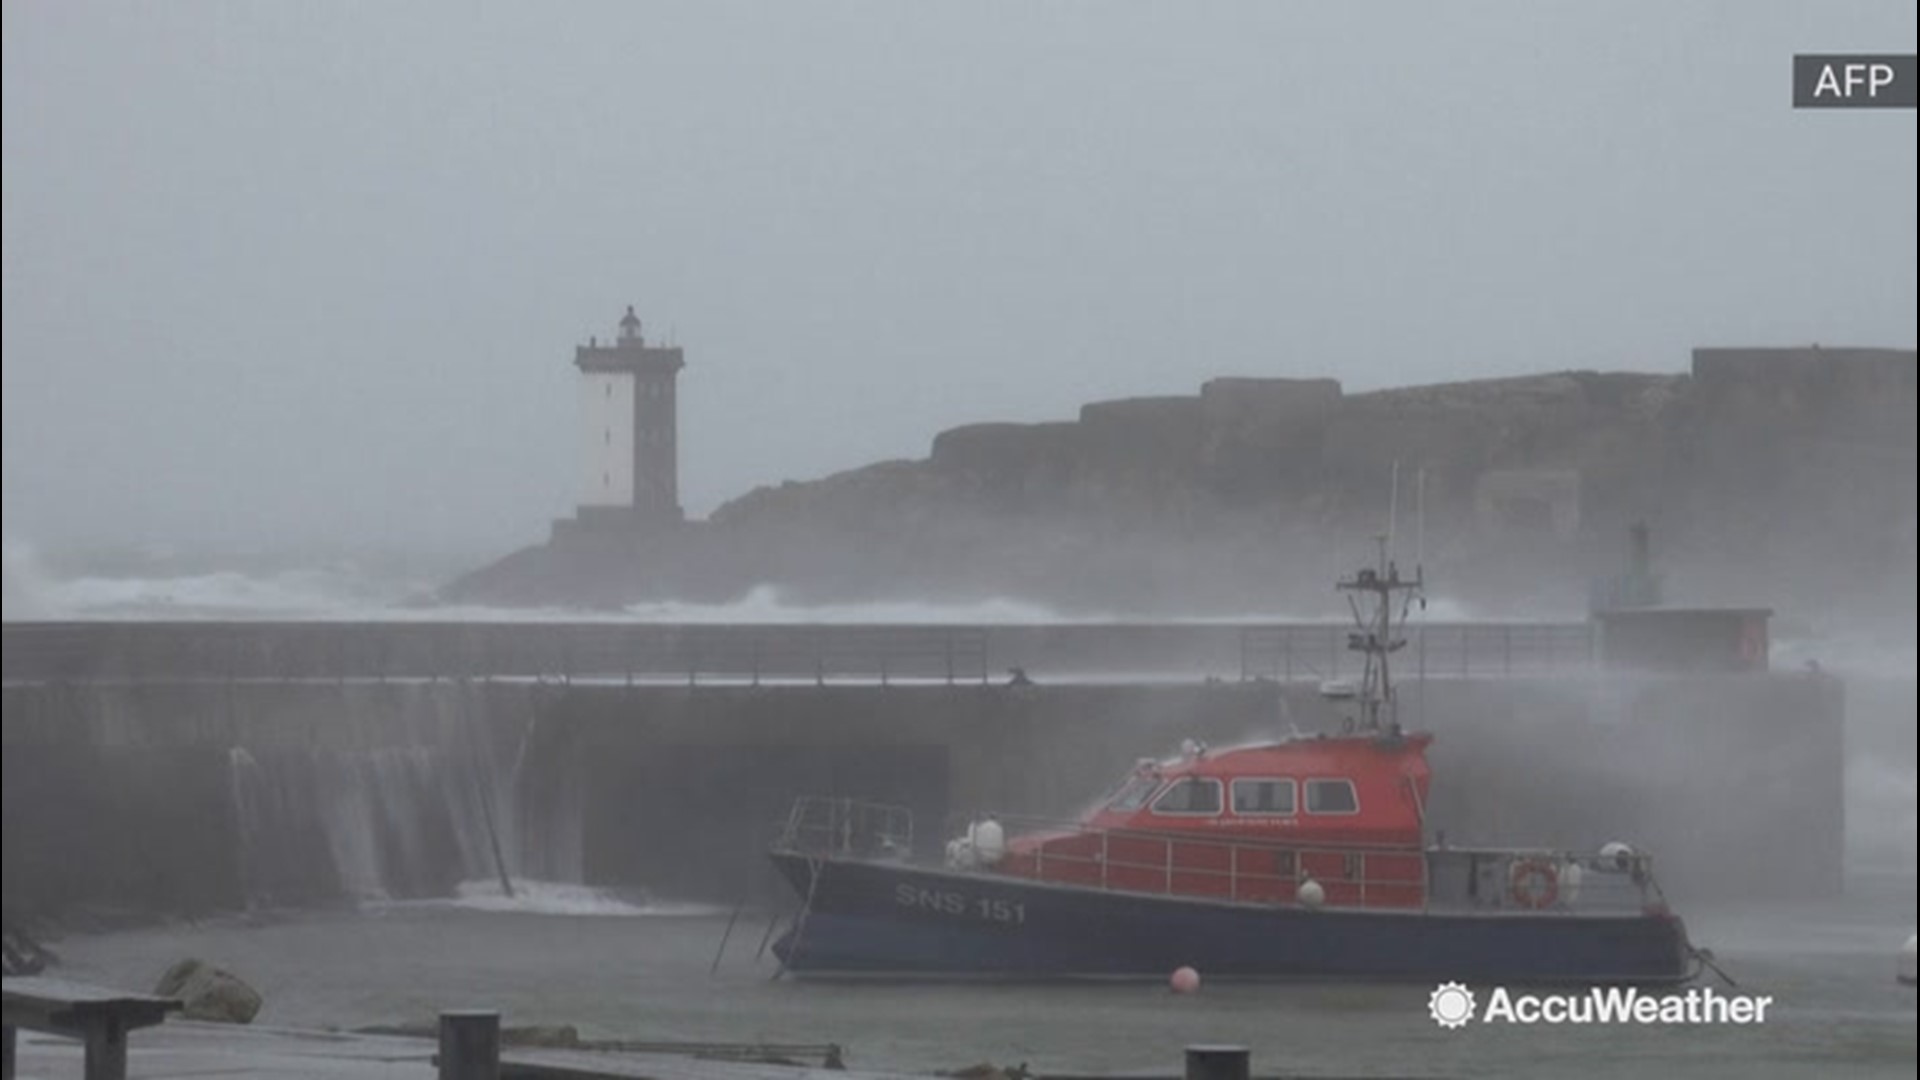 Strong winds churned up waves along the coast in Brittany, France, crashing into the western harbor on Jan. 14.